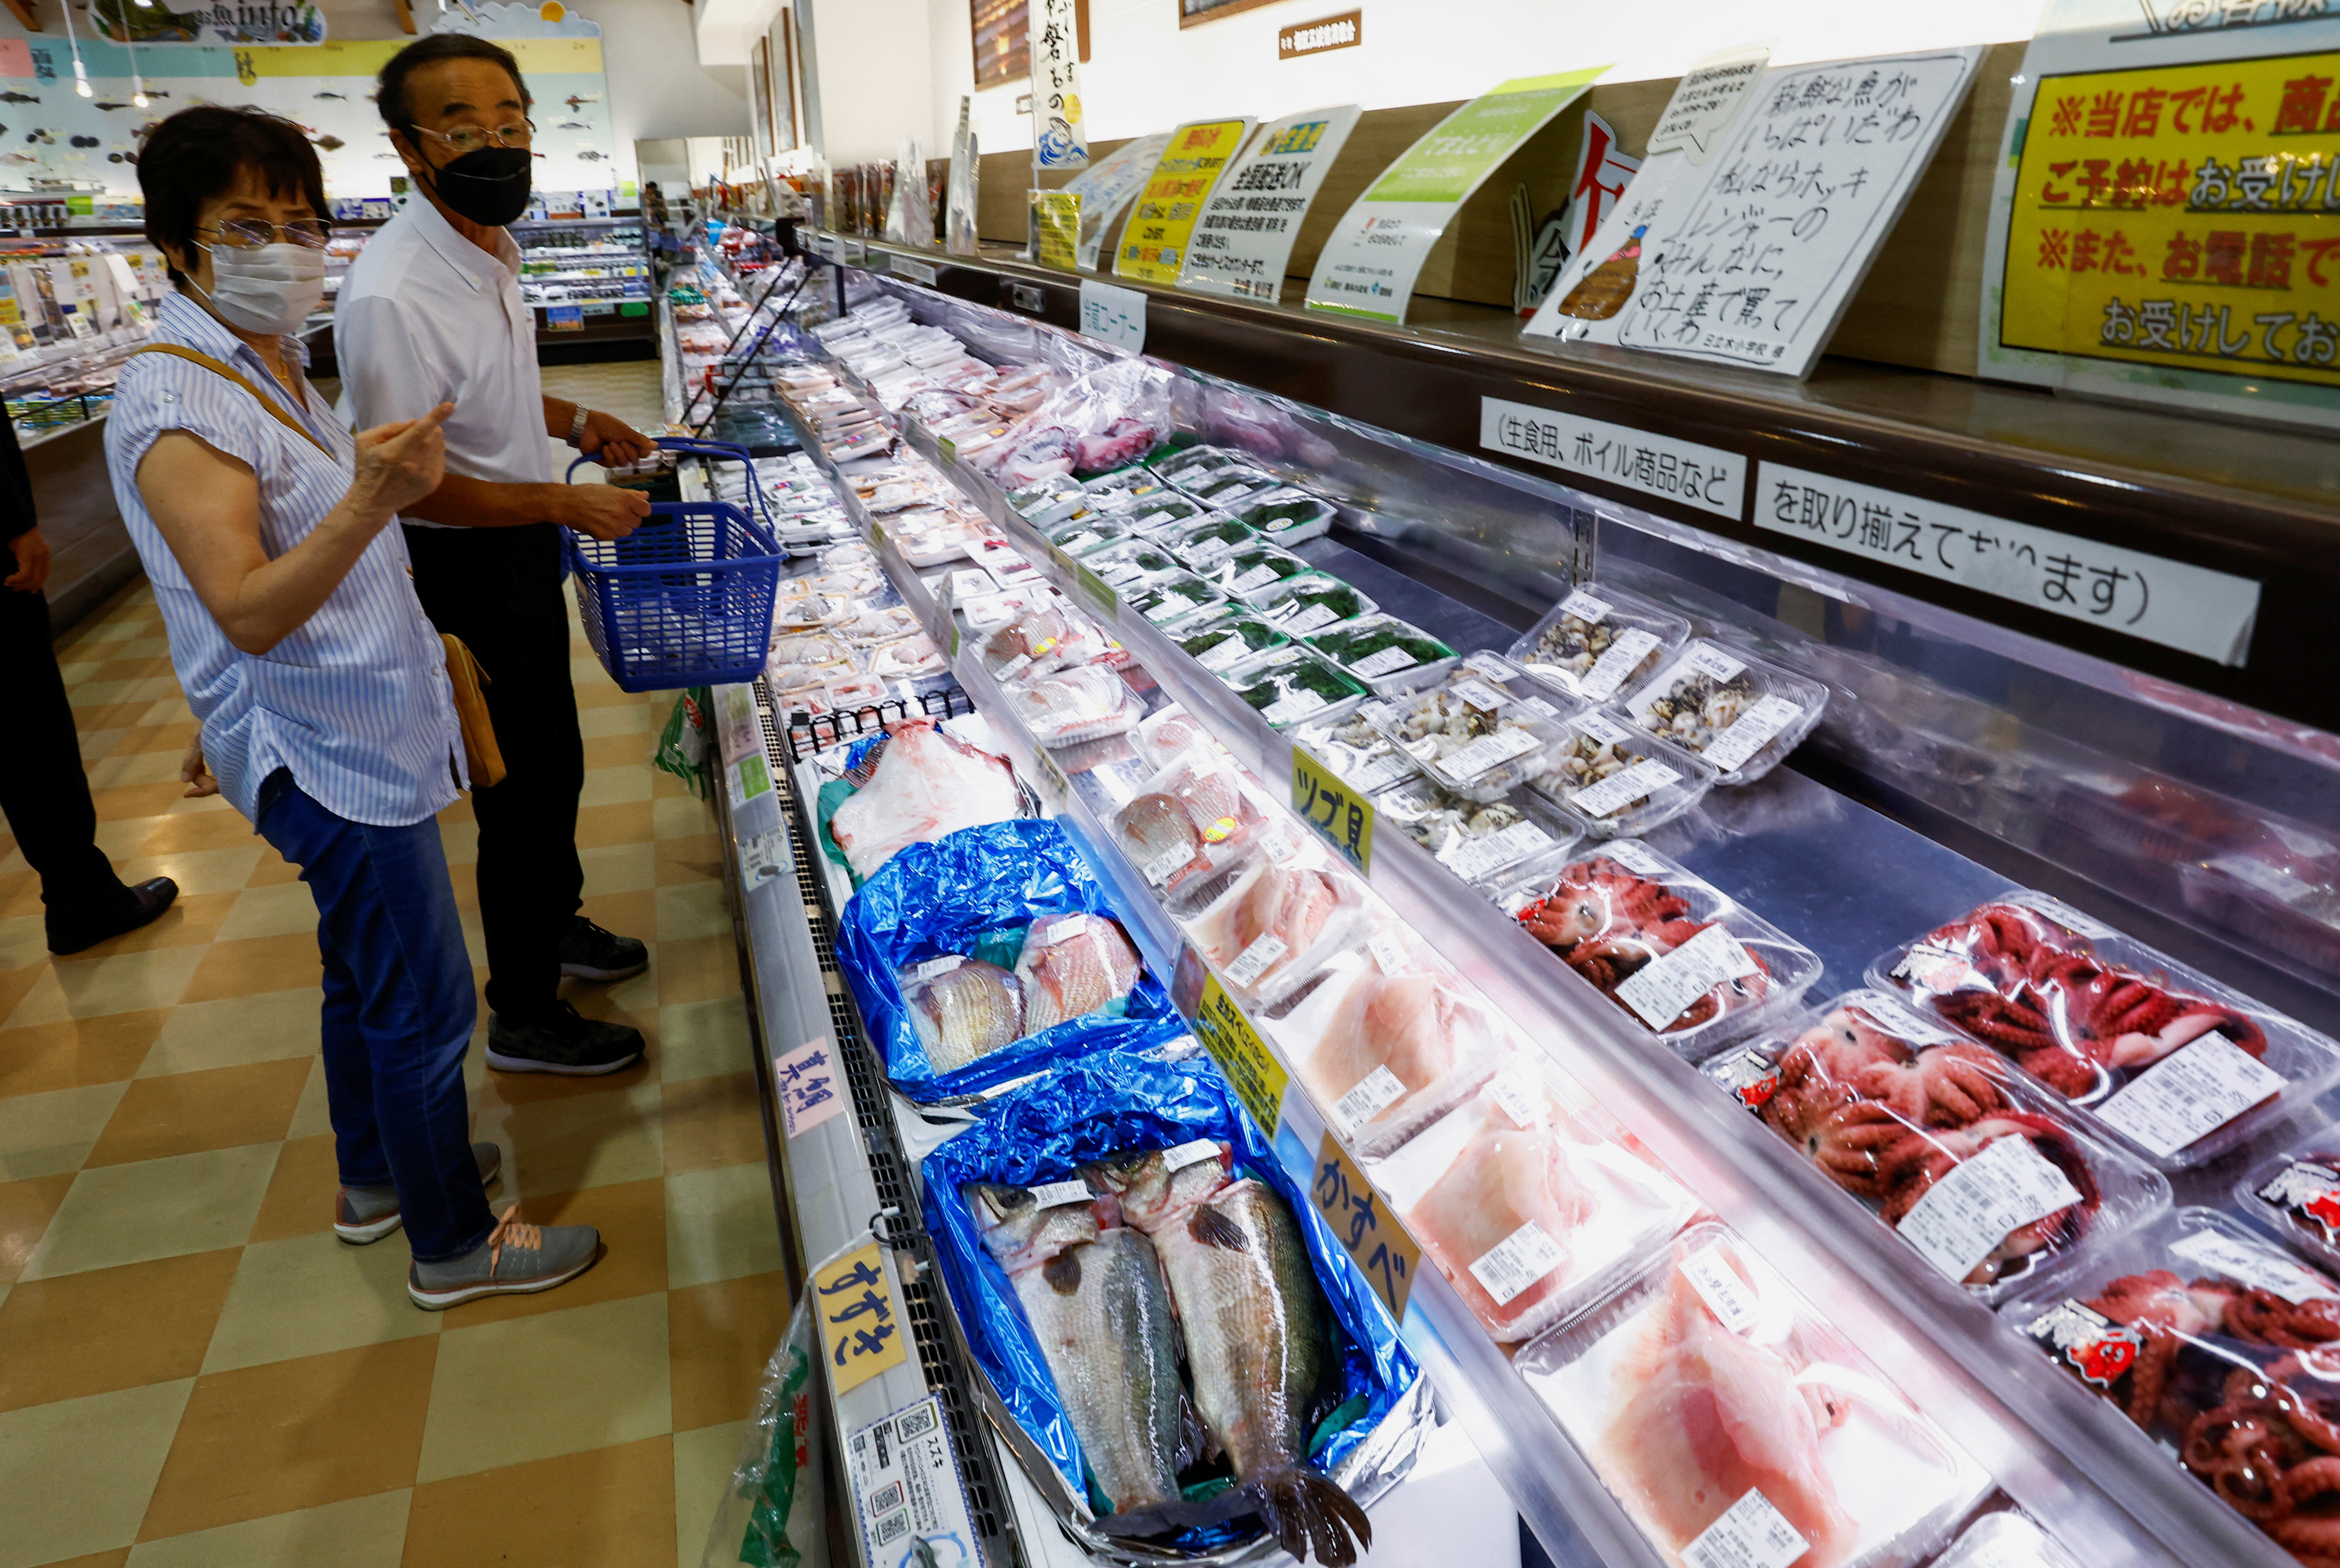 Customers browse through locally caught seafood at the Hamanoeki Fish Market and Food Court in Soma, Fukushima Prefecture